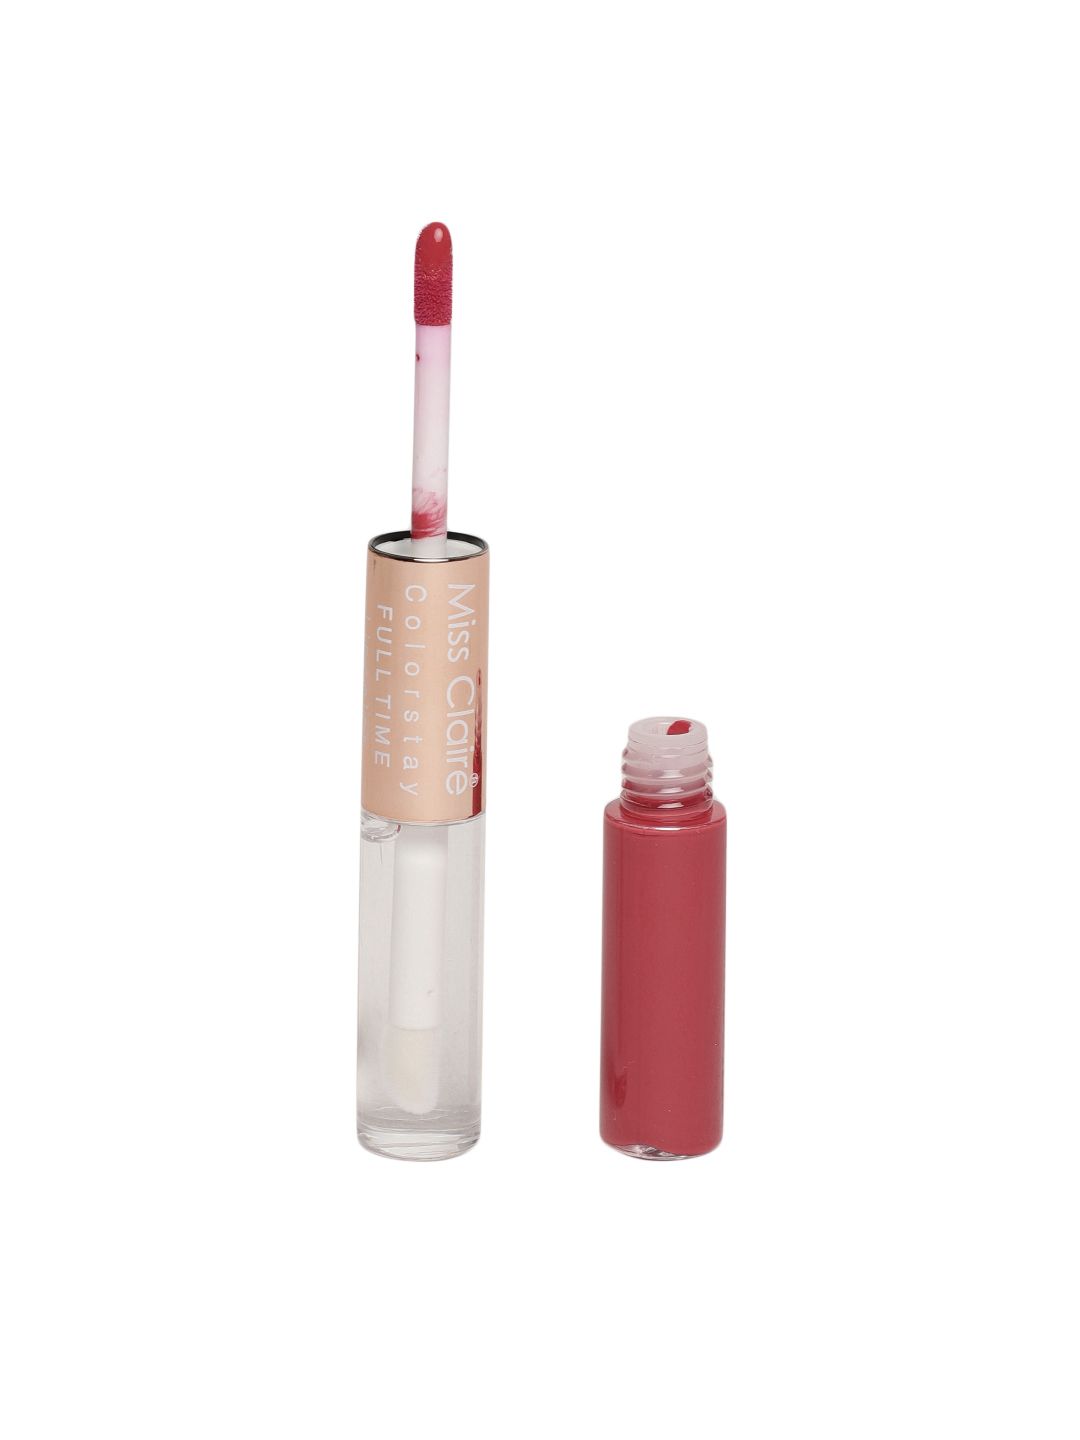 Miss Claire 25 Colorstay Full Time Lipcolor 10ml Price in India